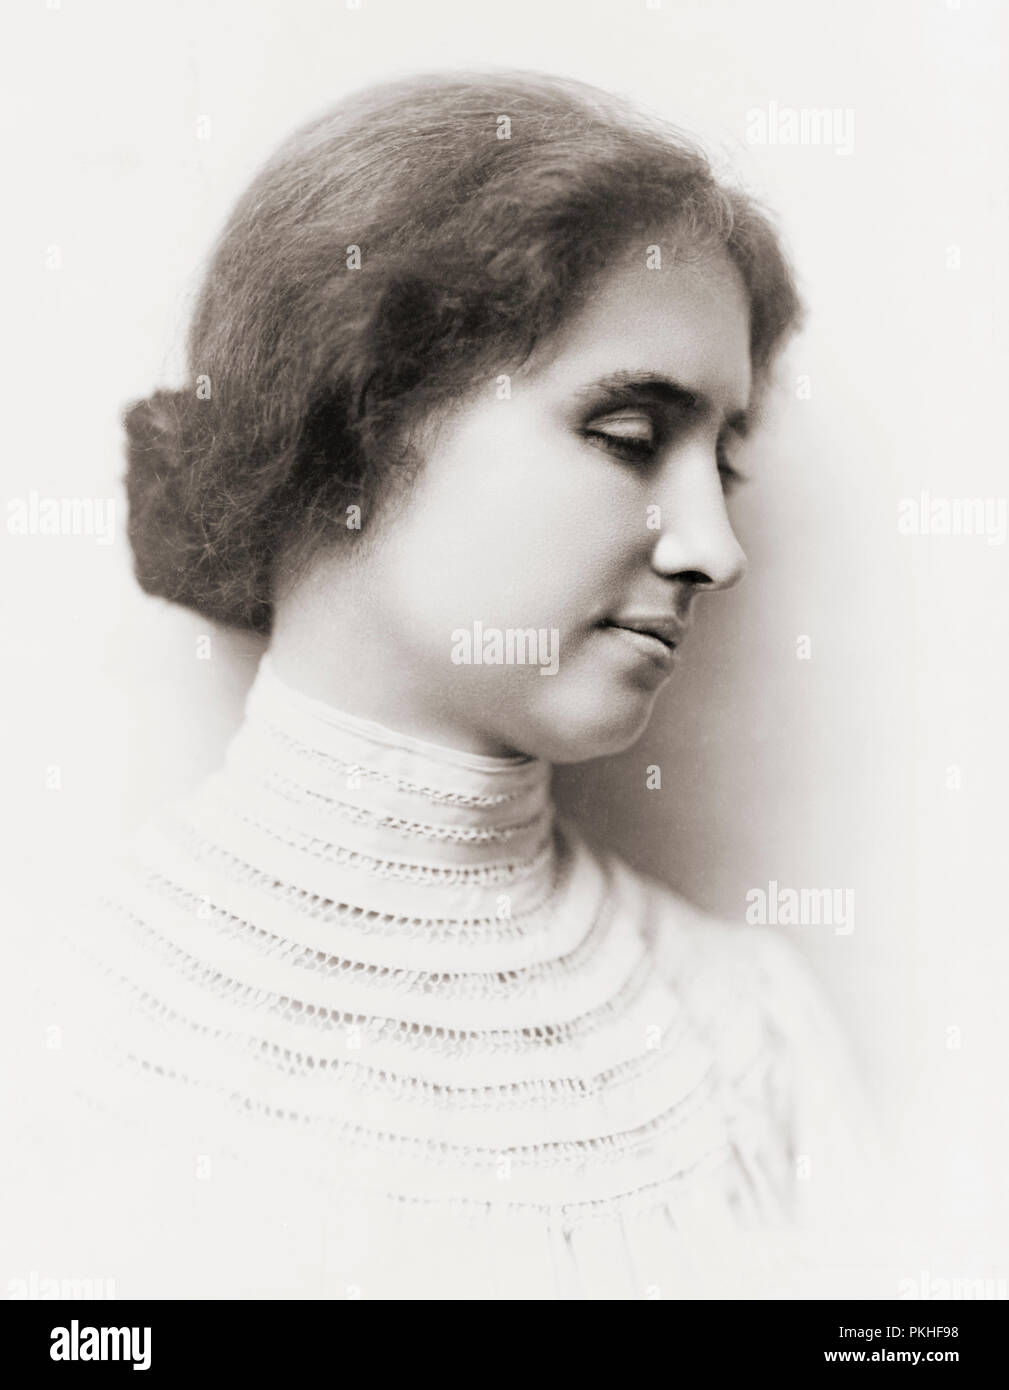 Helen Keller, 1880-1968.  Though deaf and blind, Helen Keller graduated from Harvard University’s Radcliffe College with Bachelor of Arts degree.  Her story became widely known through the play and film The Miracle Worker. Stock Photo